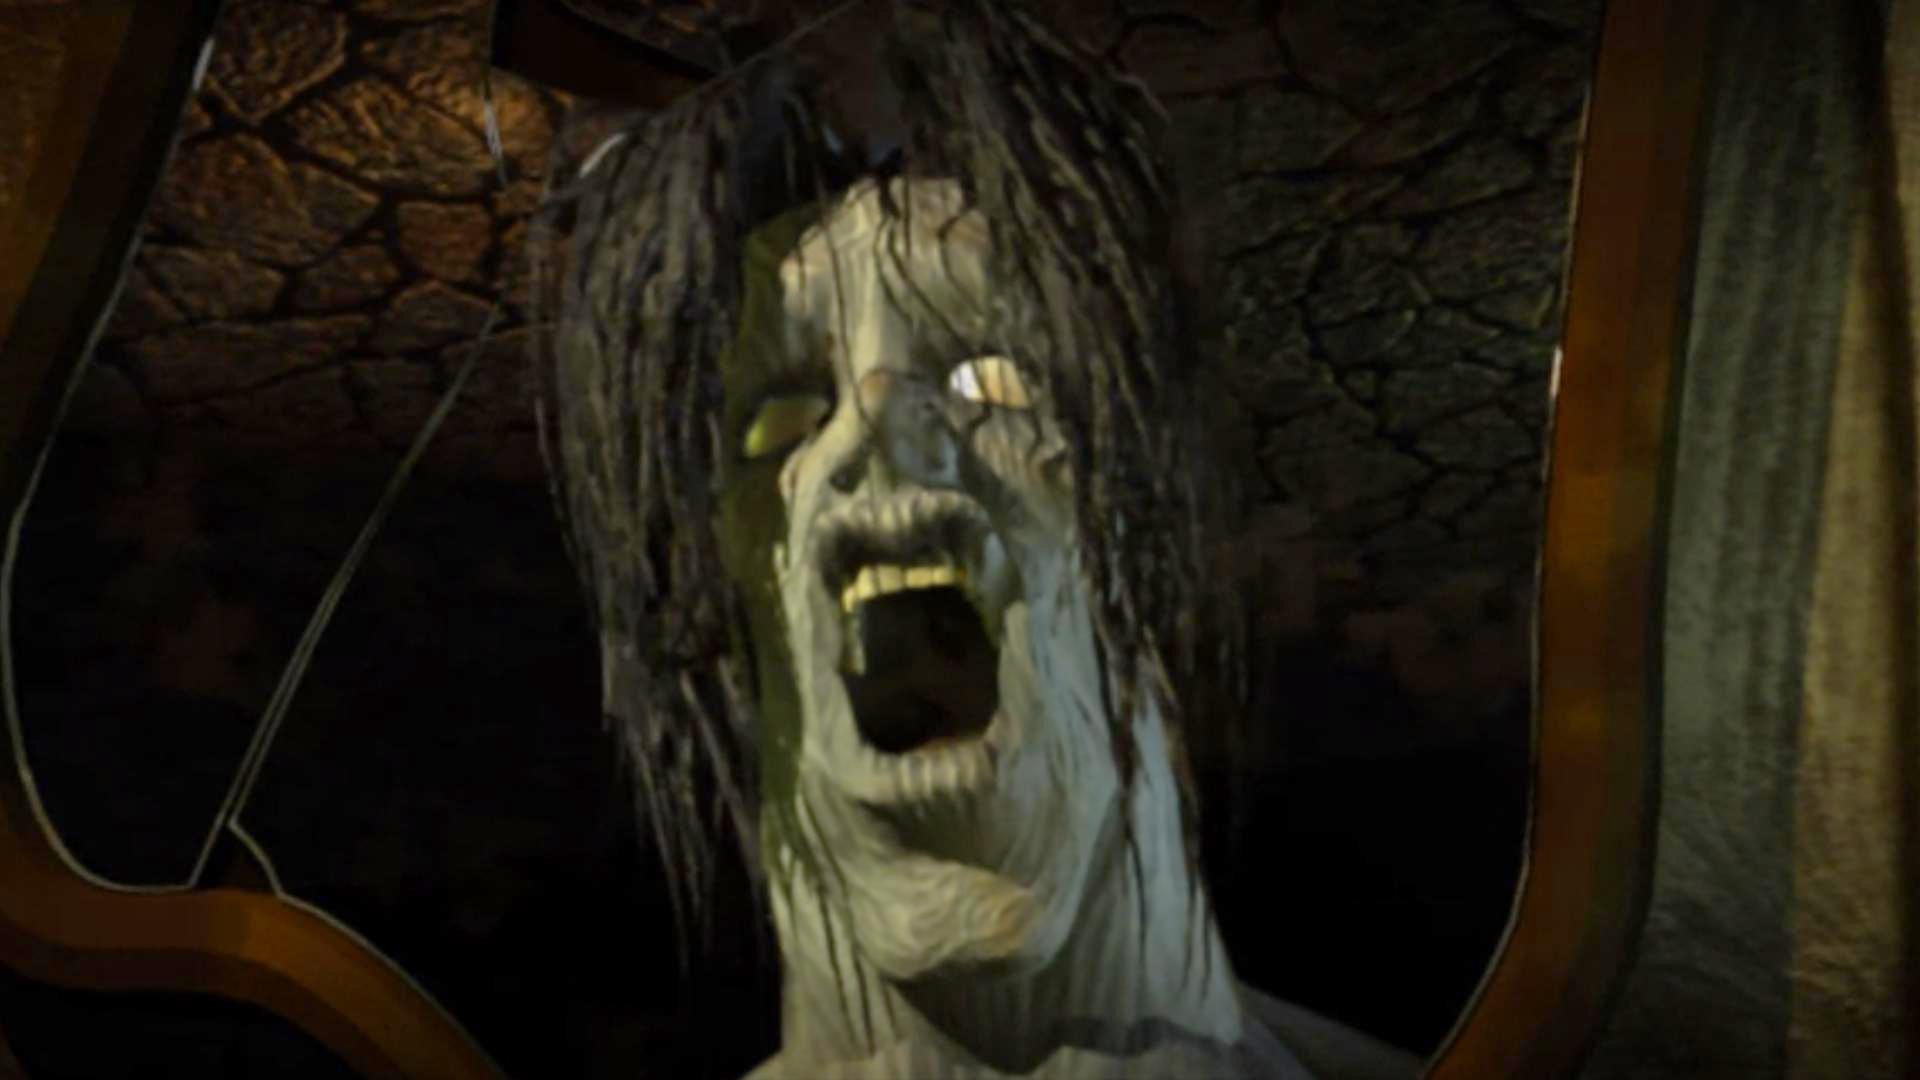 If you haven't played Planescape: Torment, the Enhanced